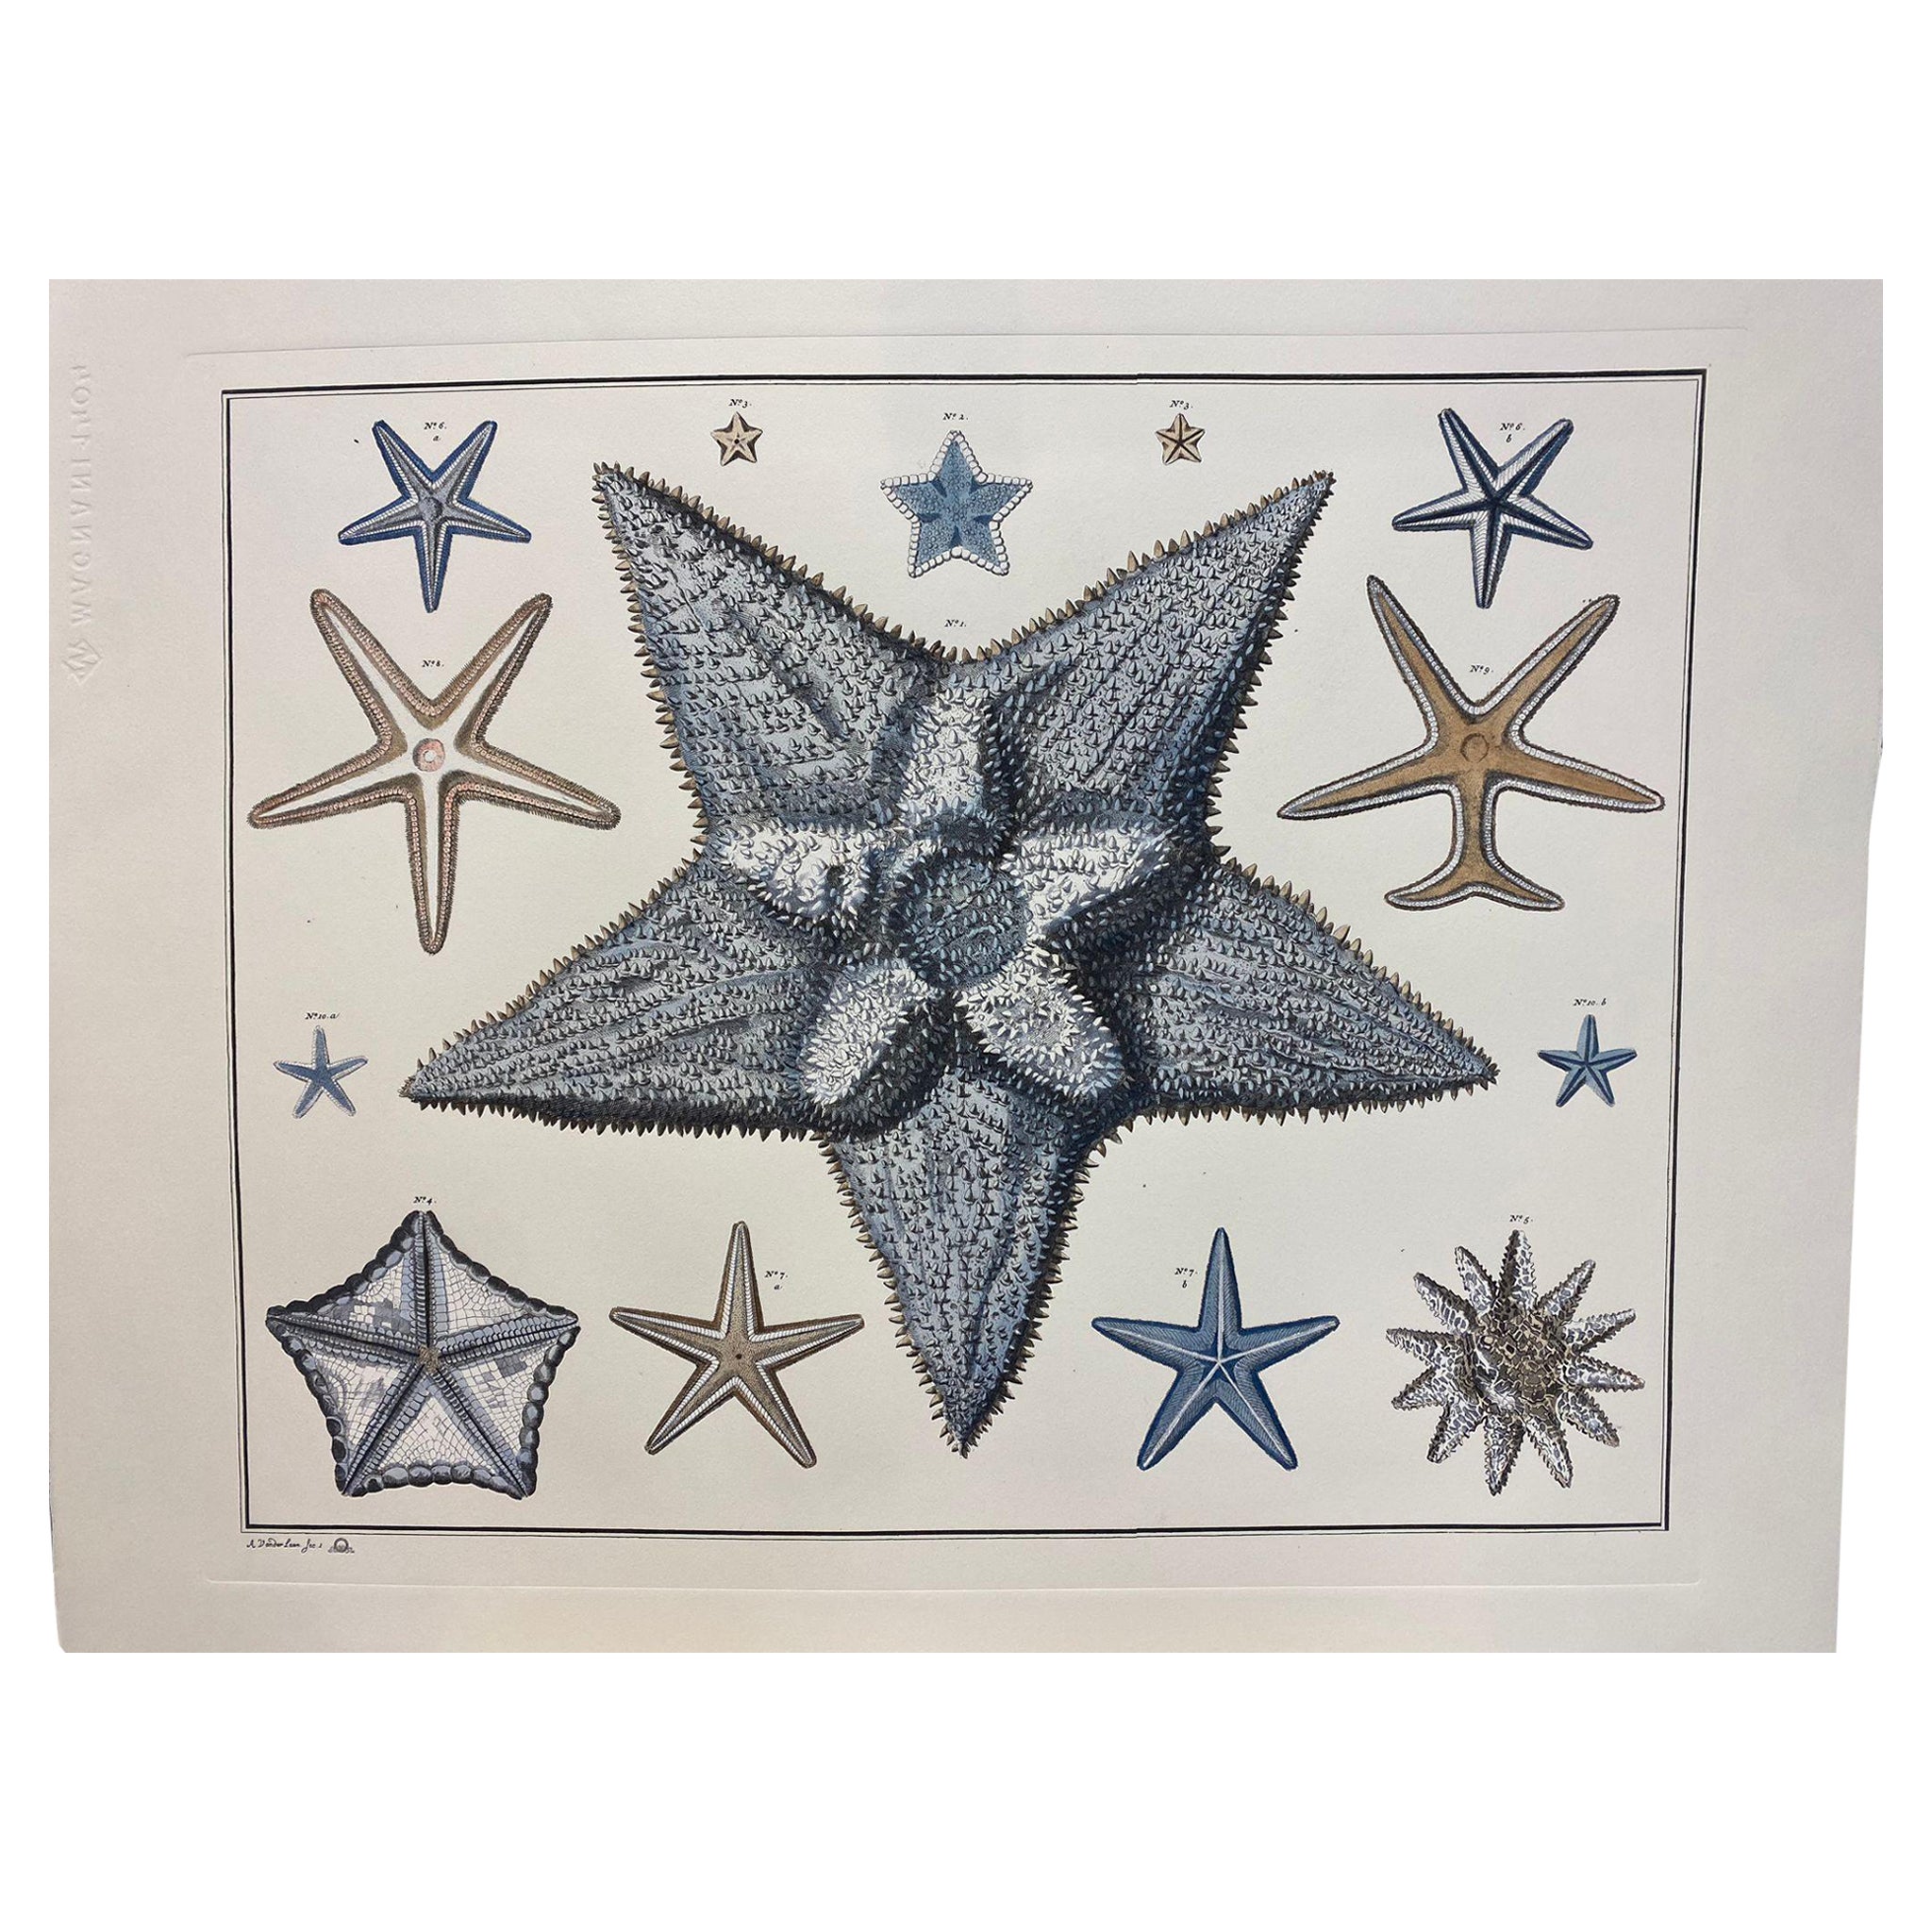 Italian Contemporary Hand Painted Print Japanese Sea Life "Starfishes", 2 of 2